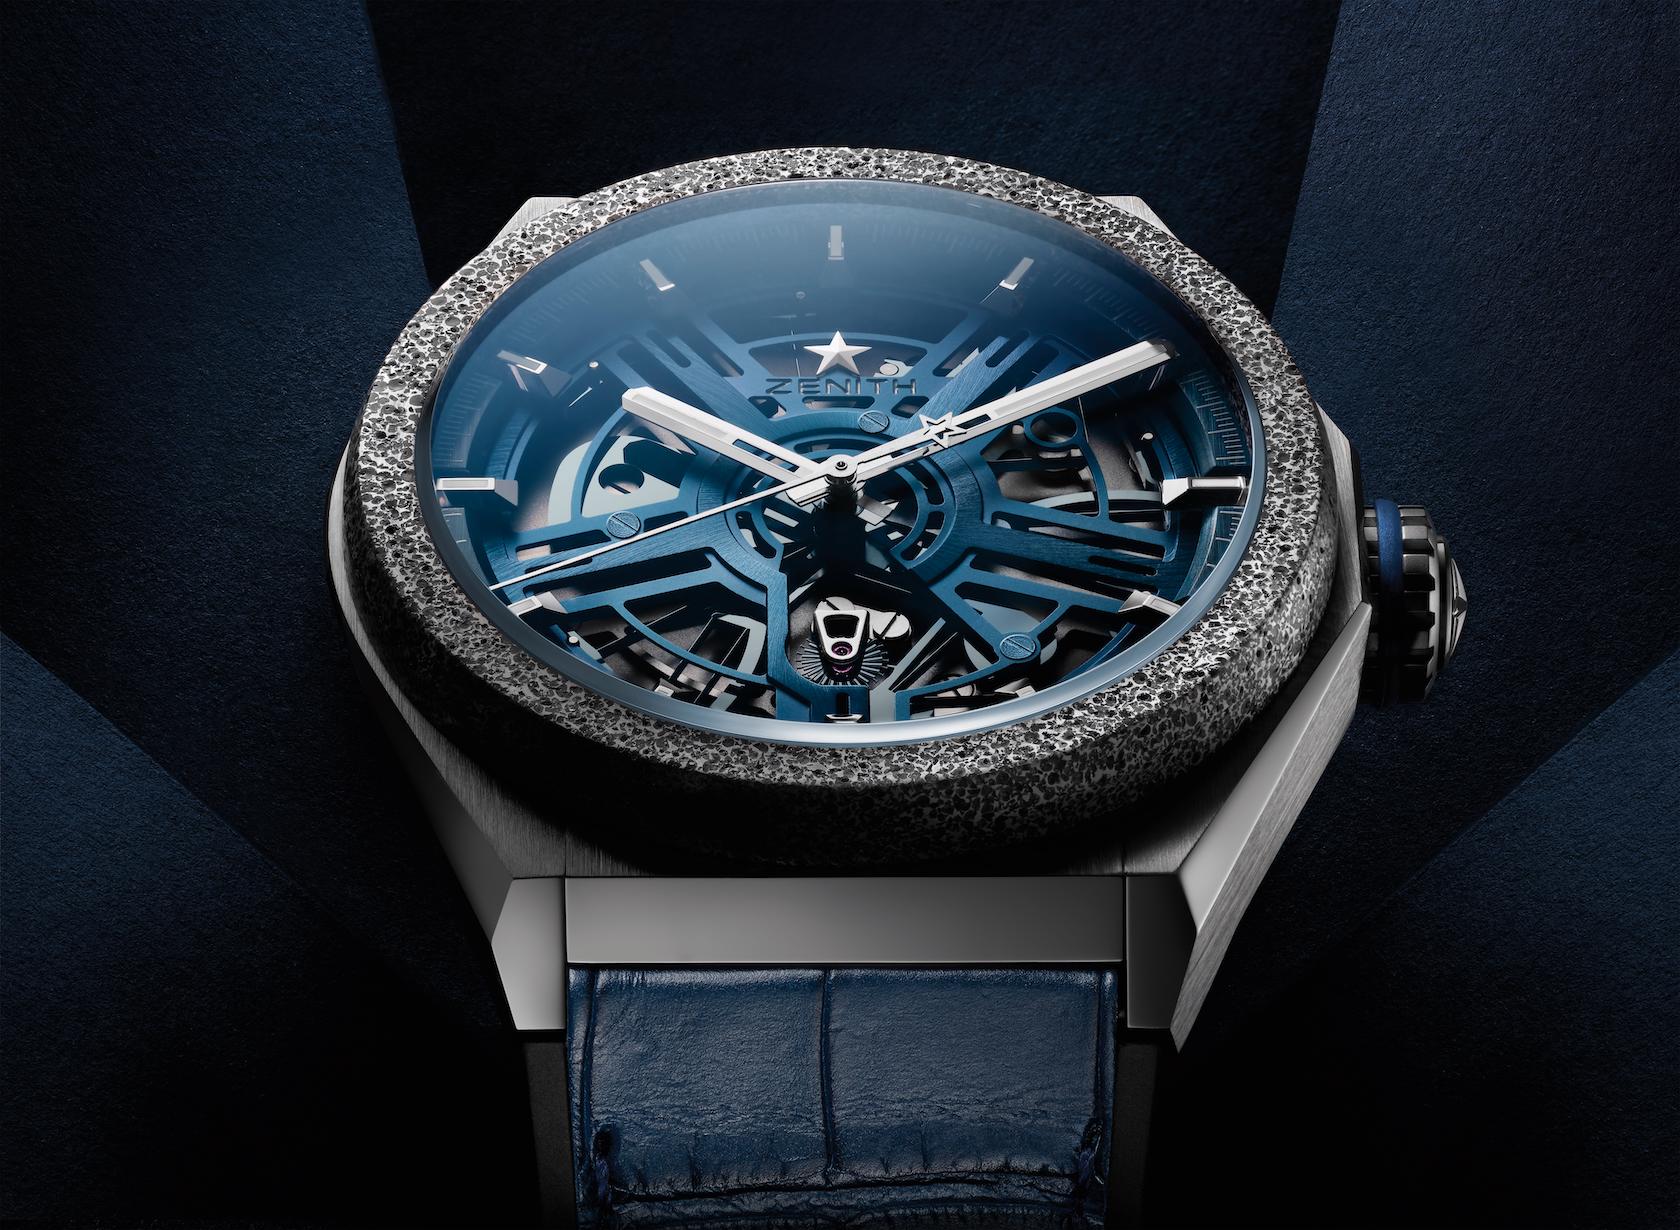 Zenith Defy Inventor as seen at Baselworld 2019